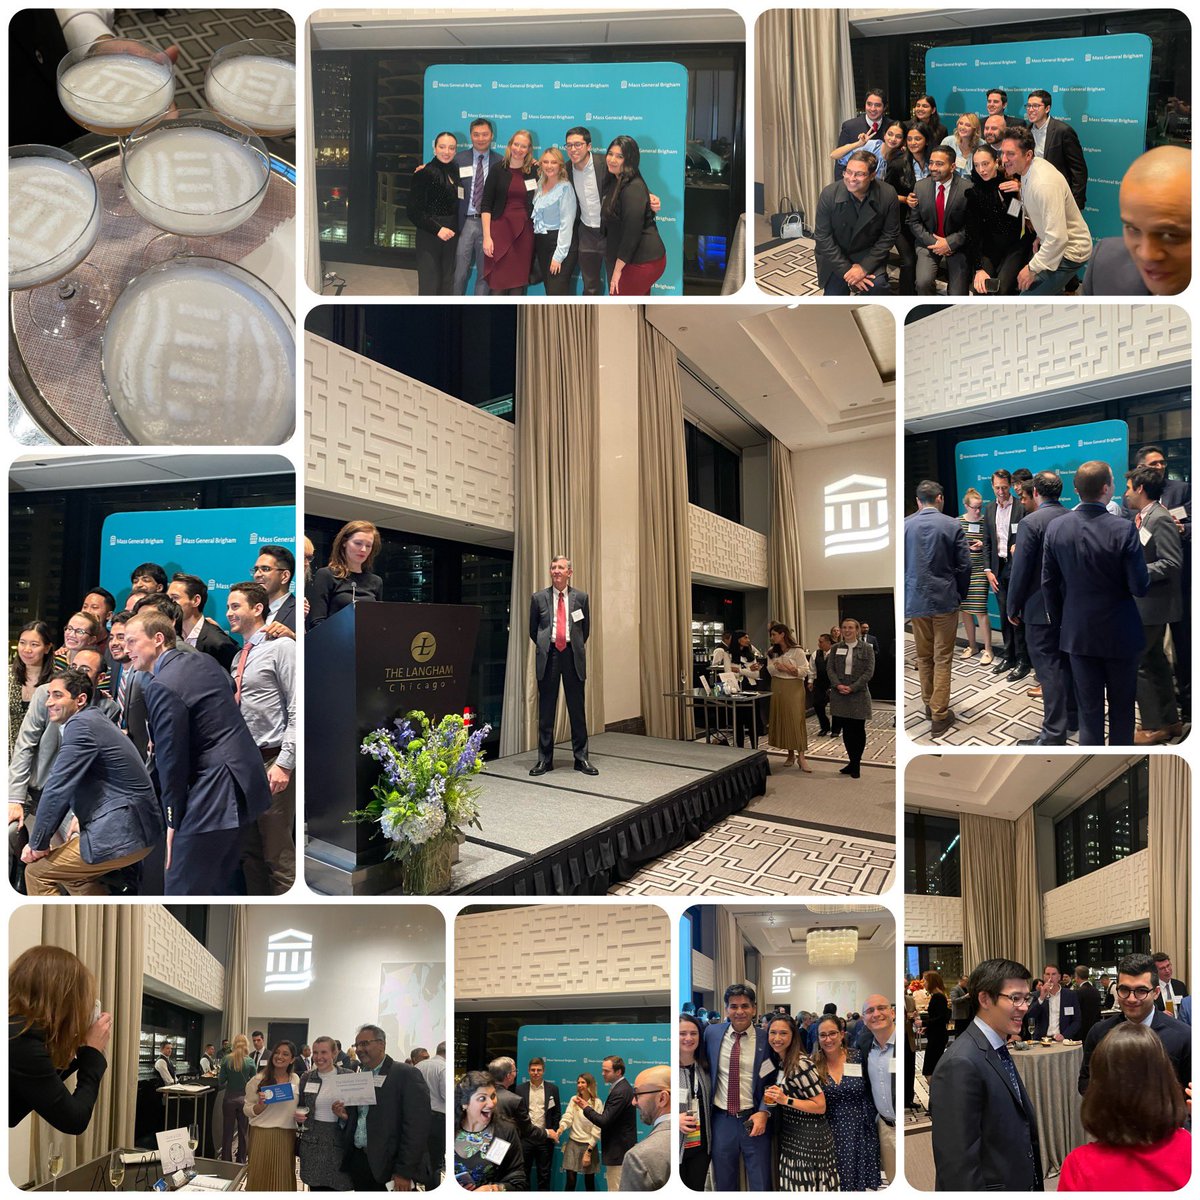 Amazing turn out tonight for our 2023 @RSNA Reunion! So good to see our @MassGeneralNews & @BrighamWomens Radiology staff & alumni come together for our annual reception. @JimBrinkMD and Vice Chairs for Faculty Affairs hosted the most heartwarming evening! #MGBRadiologyRSNA2023